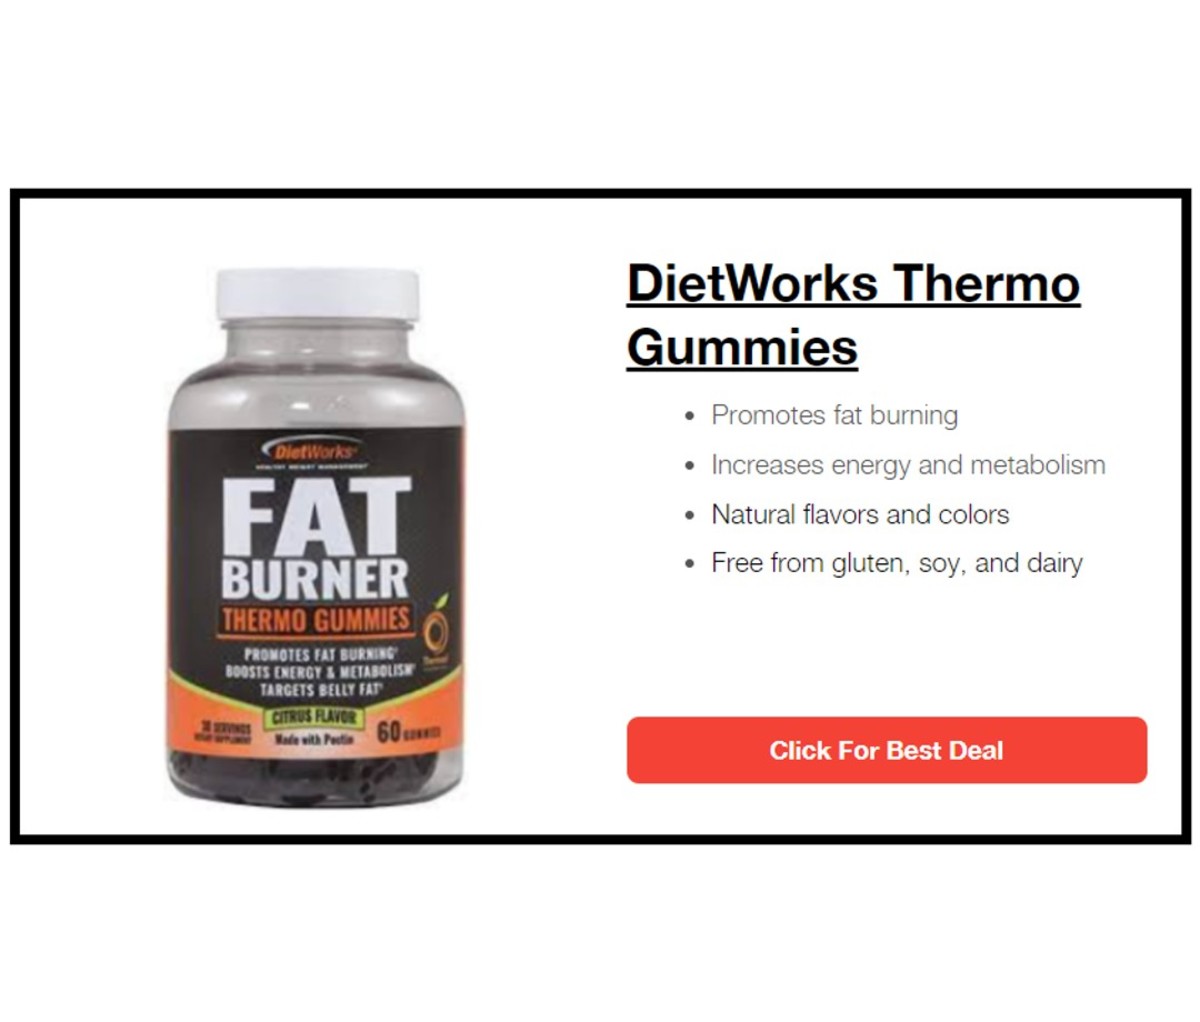 DietWorks Thermo Gummies